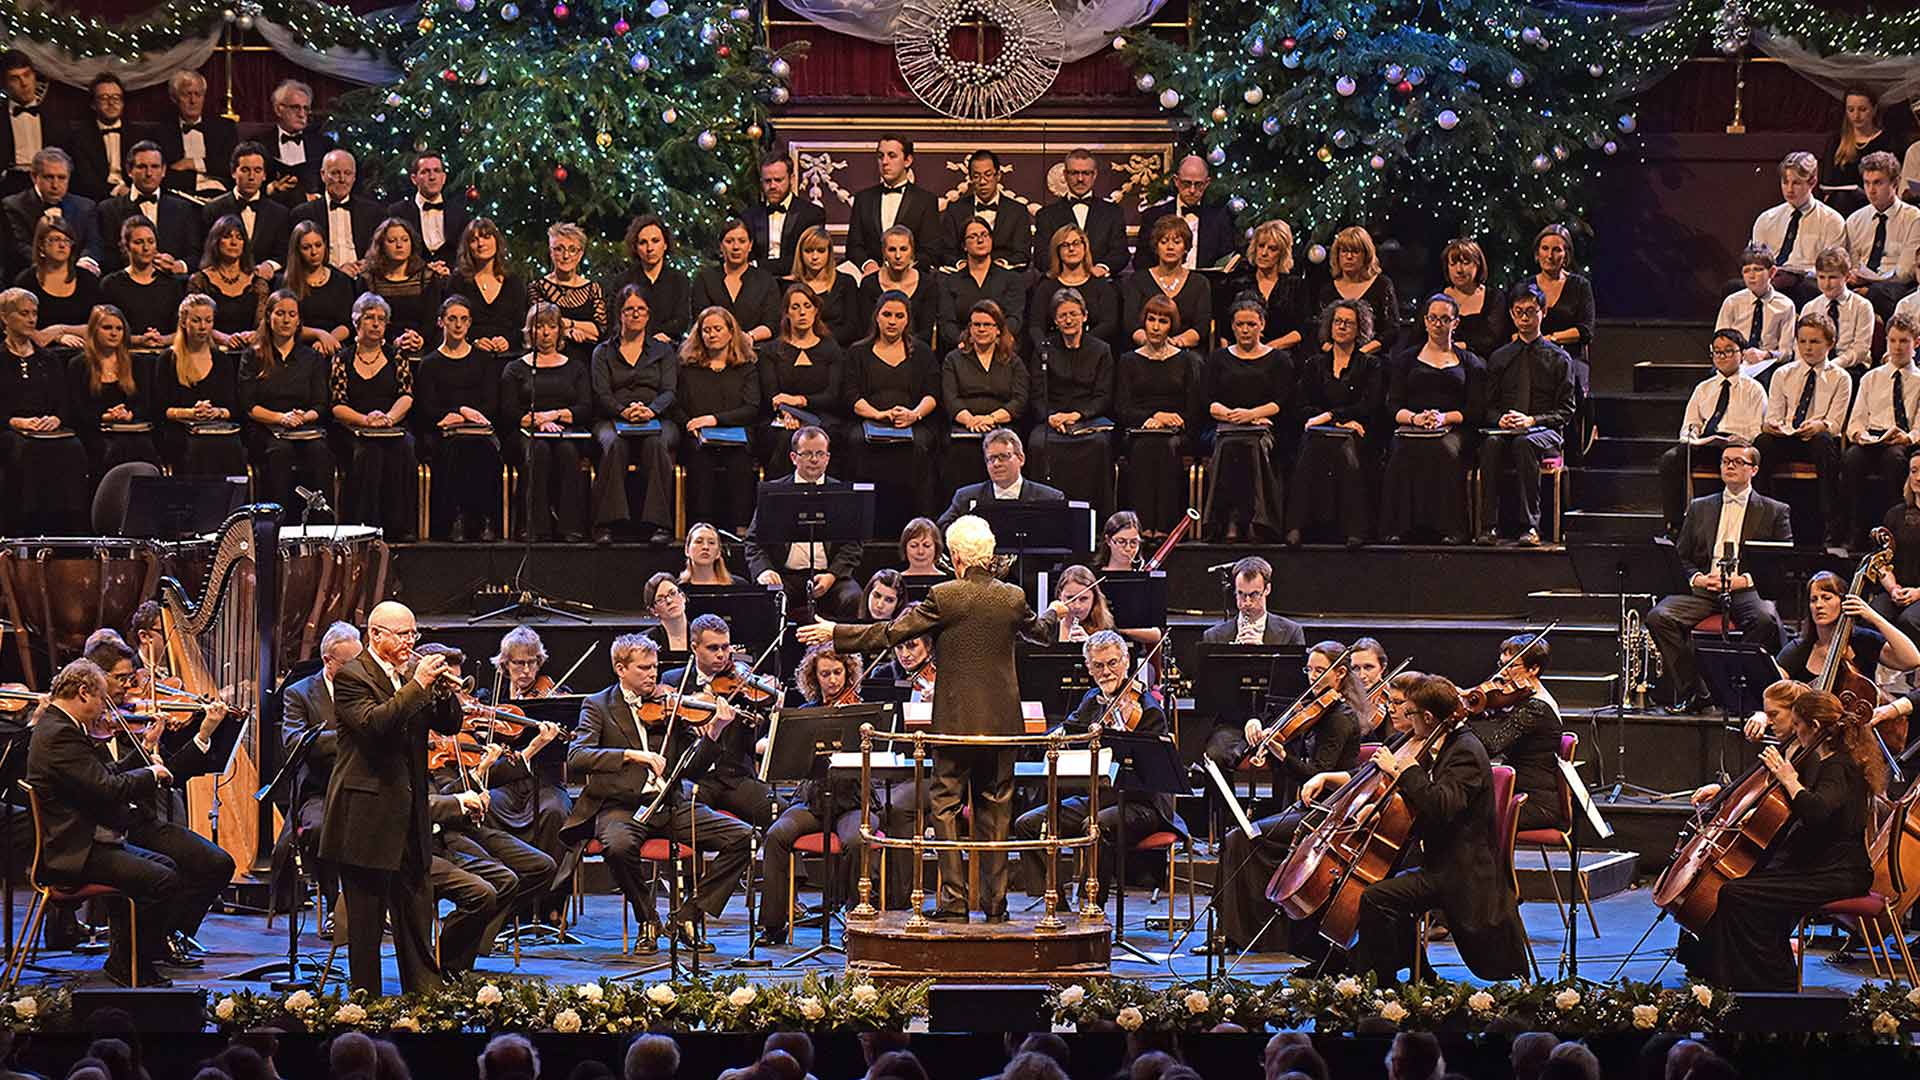 The Glory of Christmas. NCH. Live Music & Events